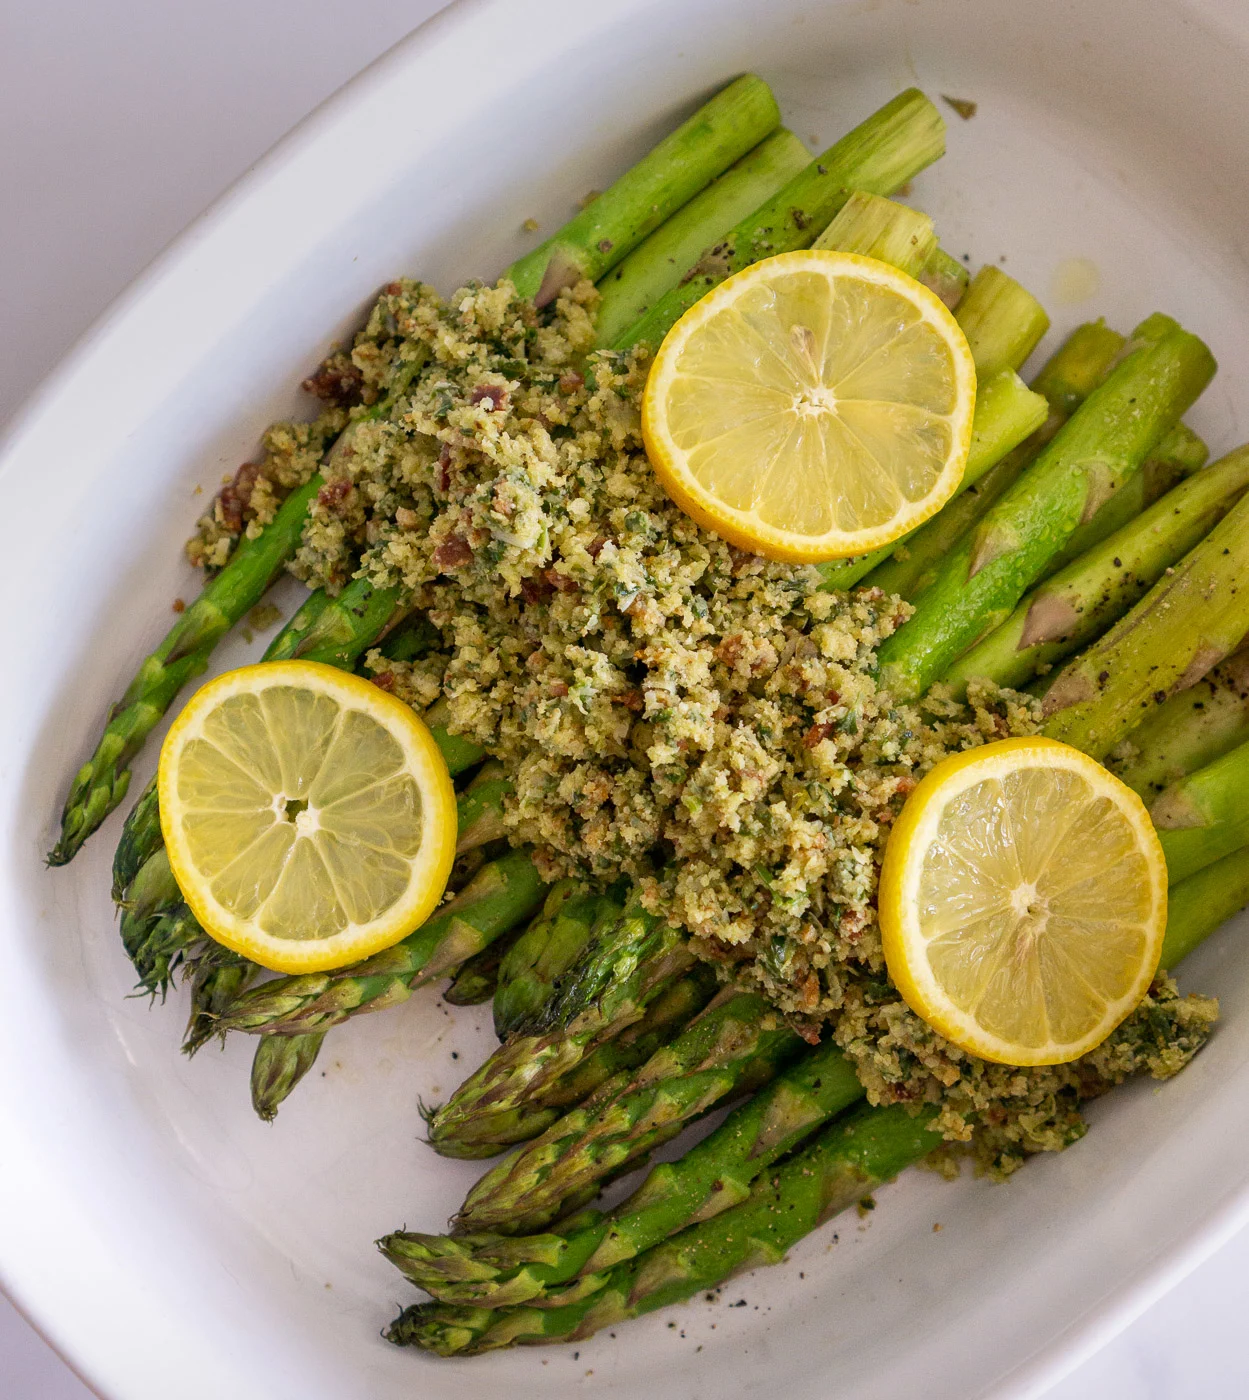 roasted asparagus side dish with bacon topping